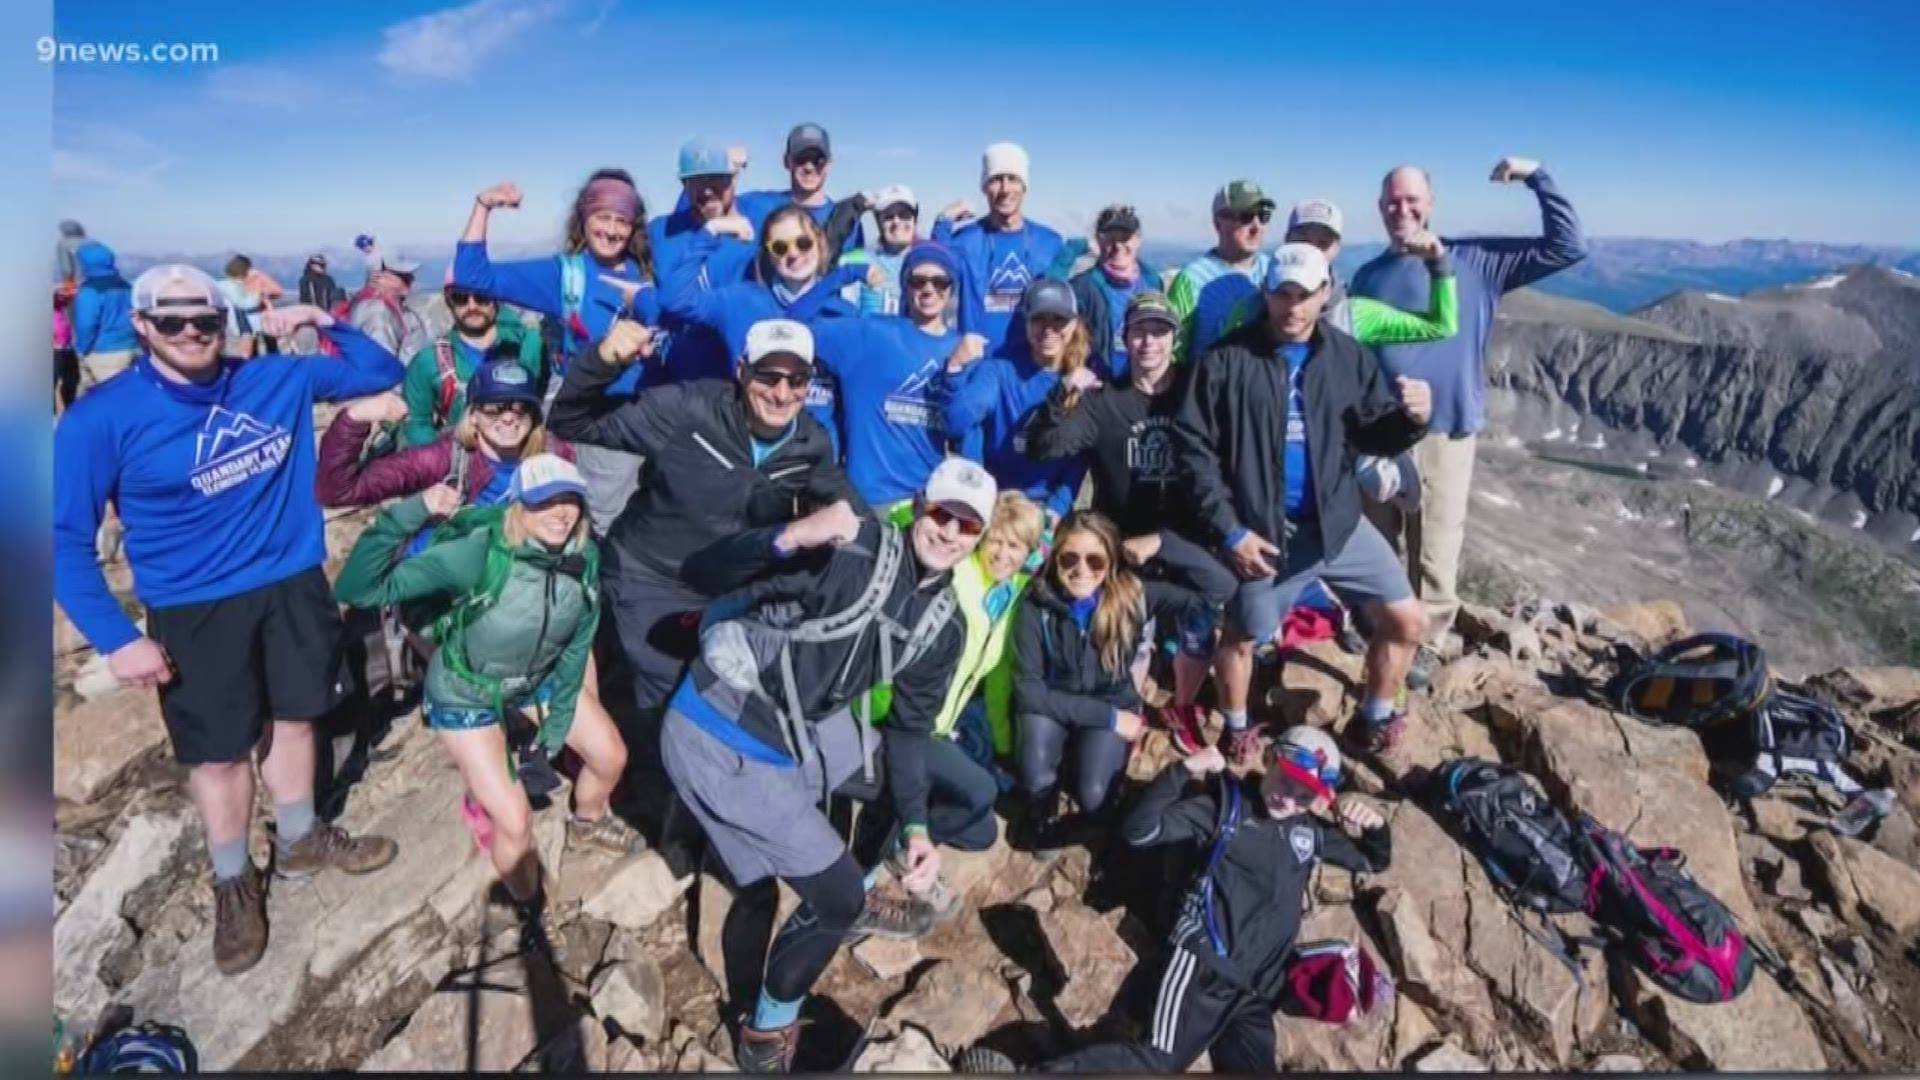 This year's climb has already raised $76,000 to fight colorectal cancer.